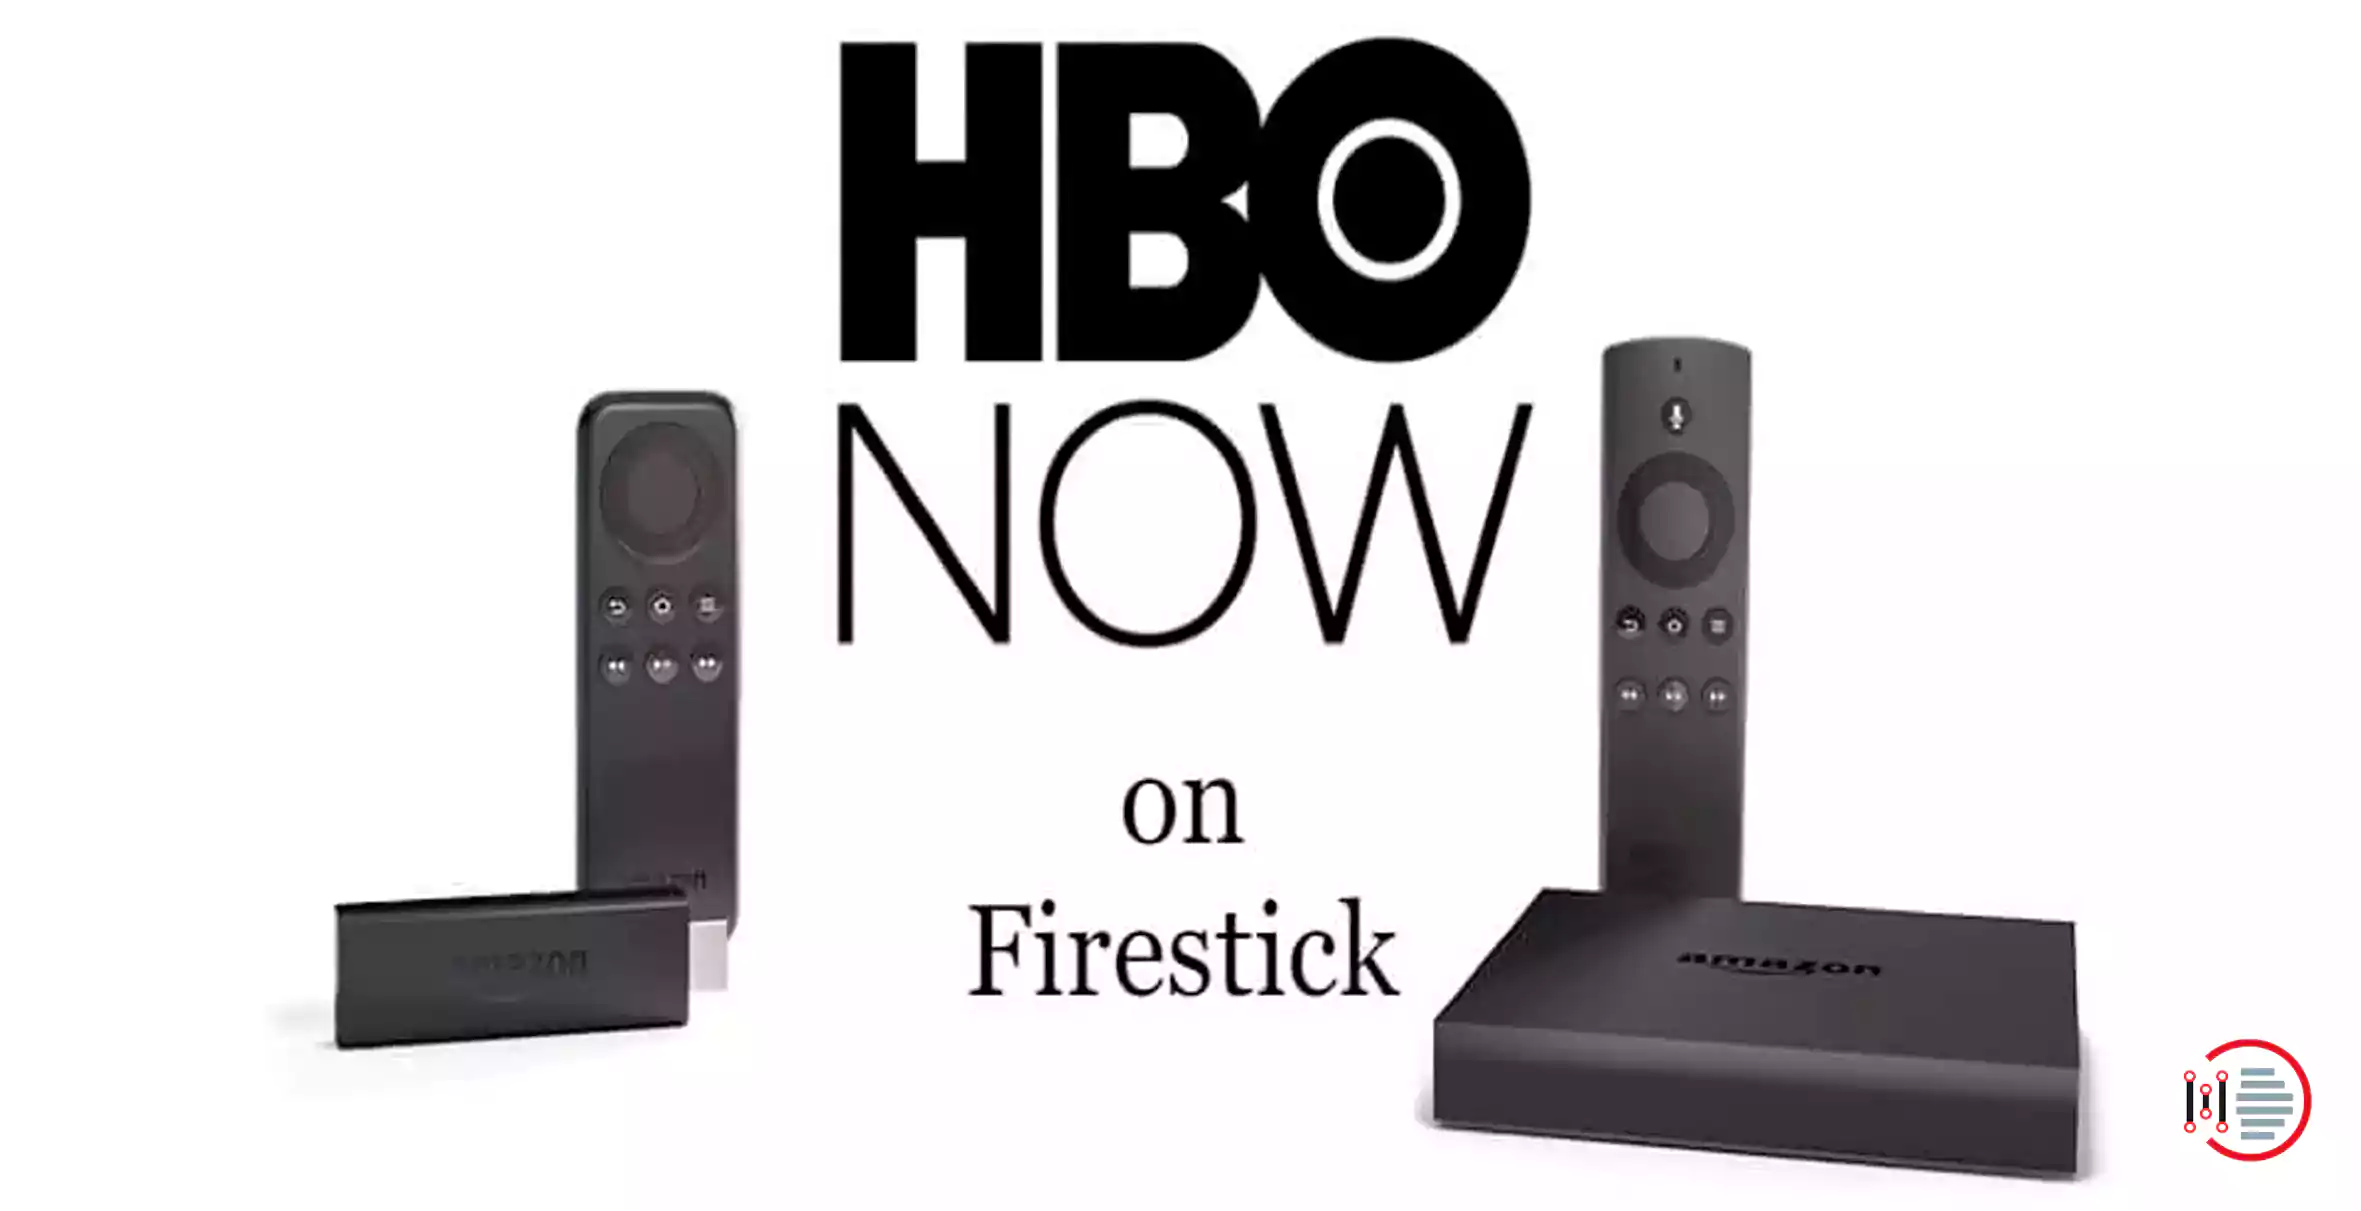 How to easily install HBO GO on Firestick accurately